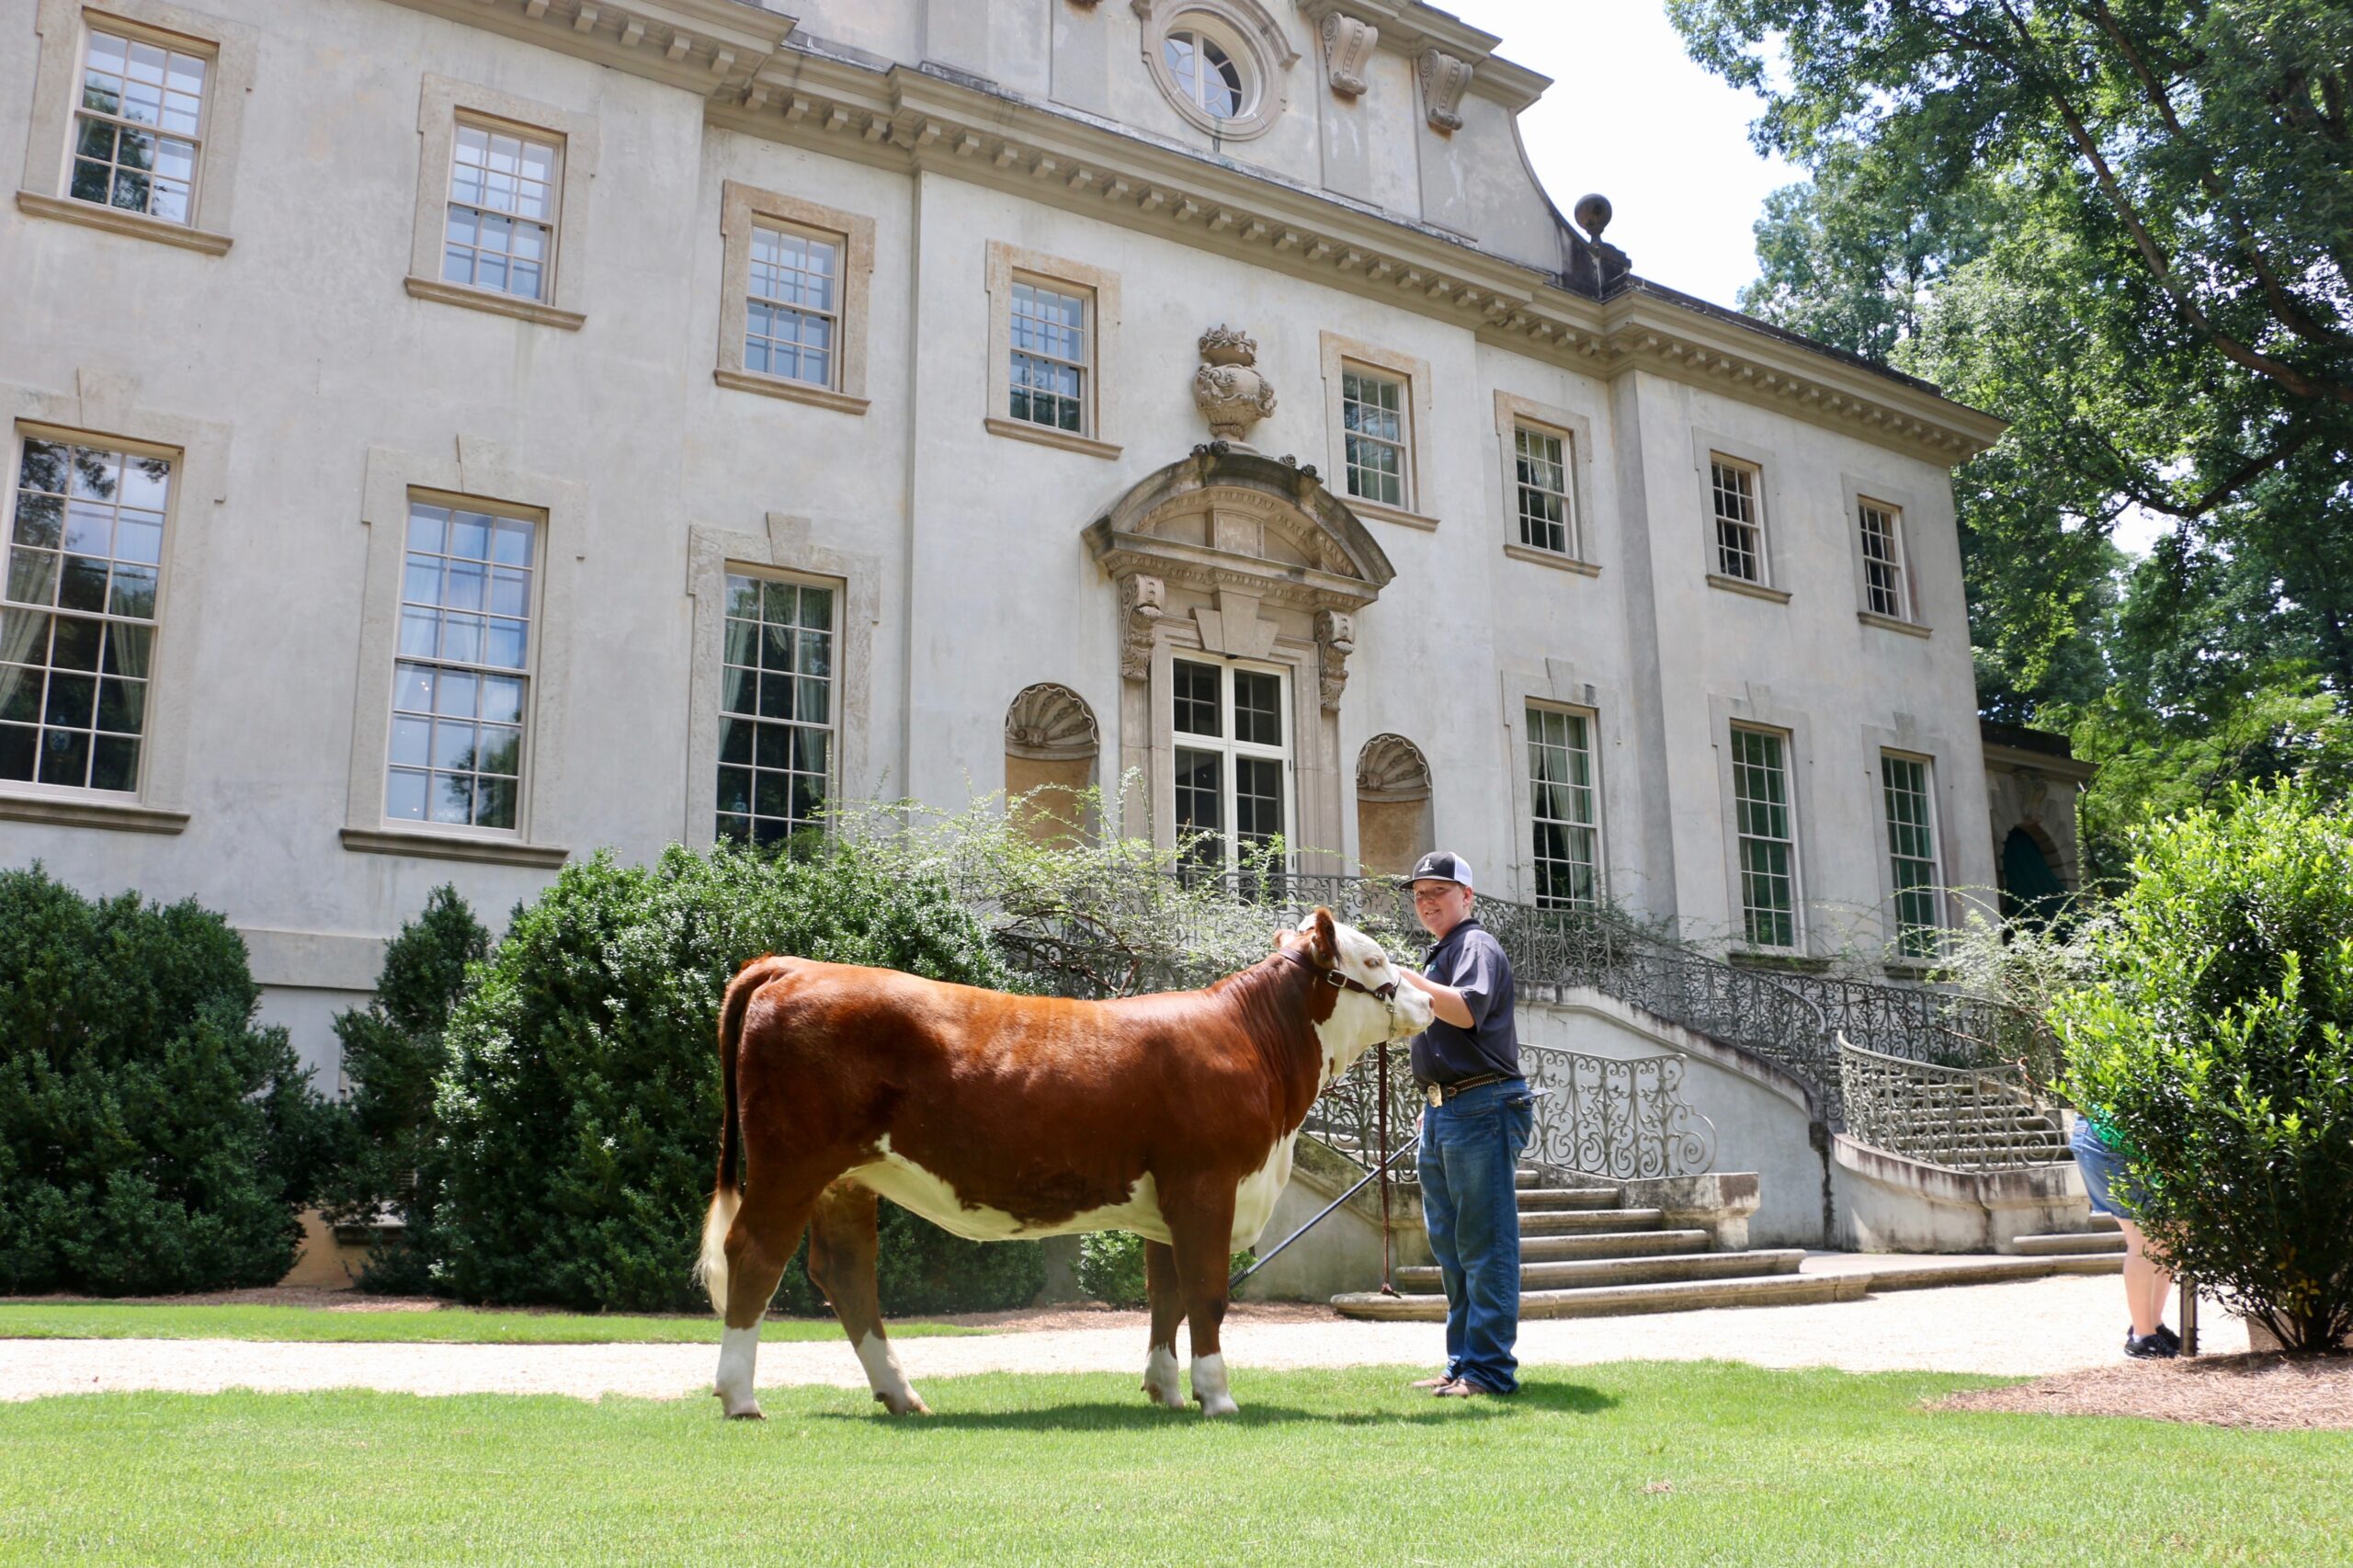 Brown and white cow and man standing in front of white building